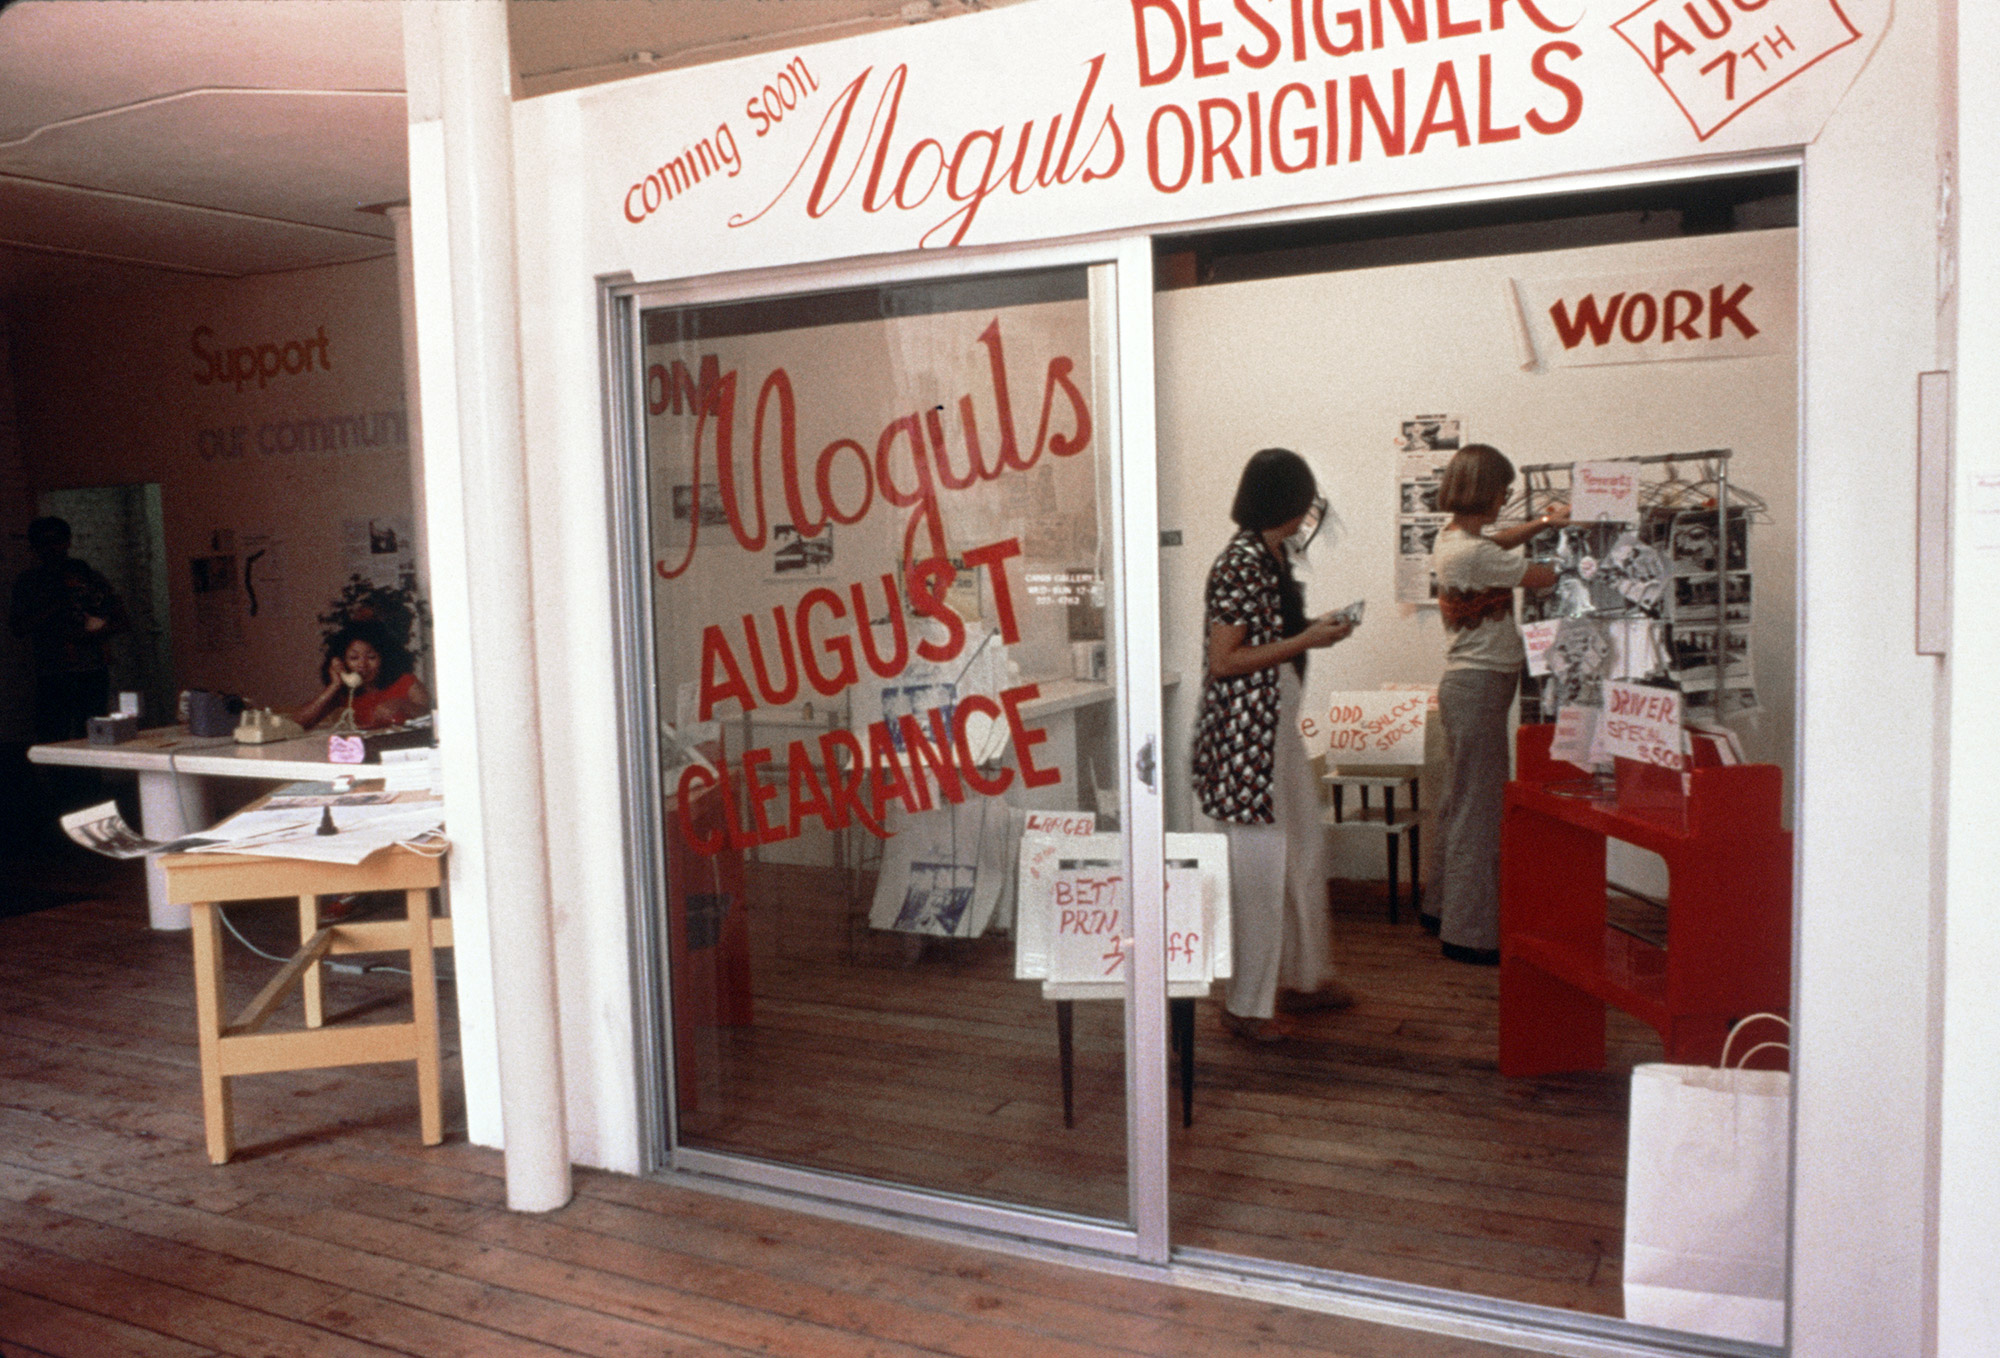 1.-August_Clearance_Storefront_1976-copy